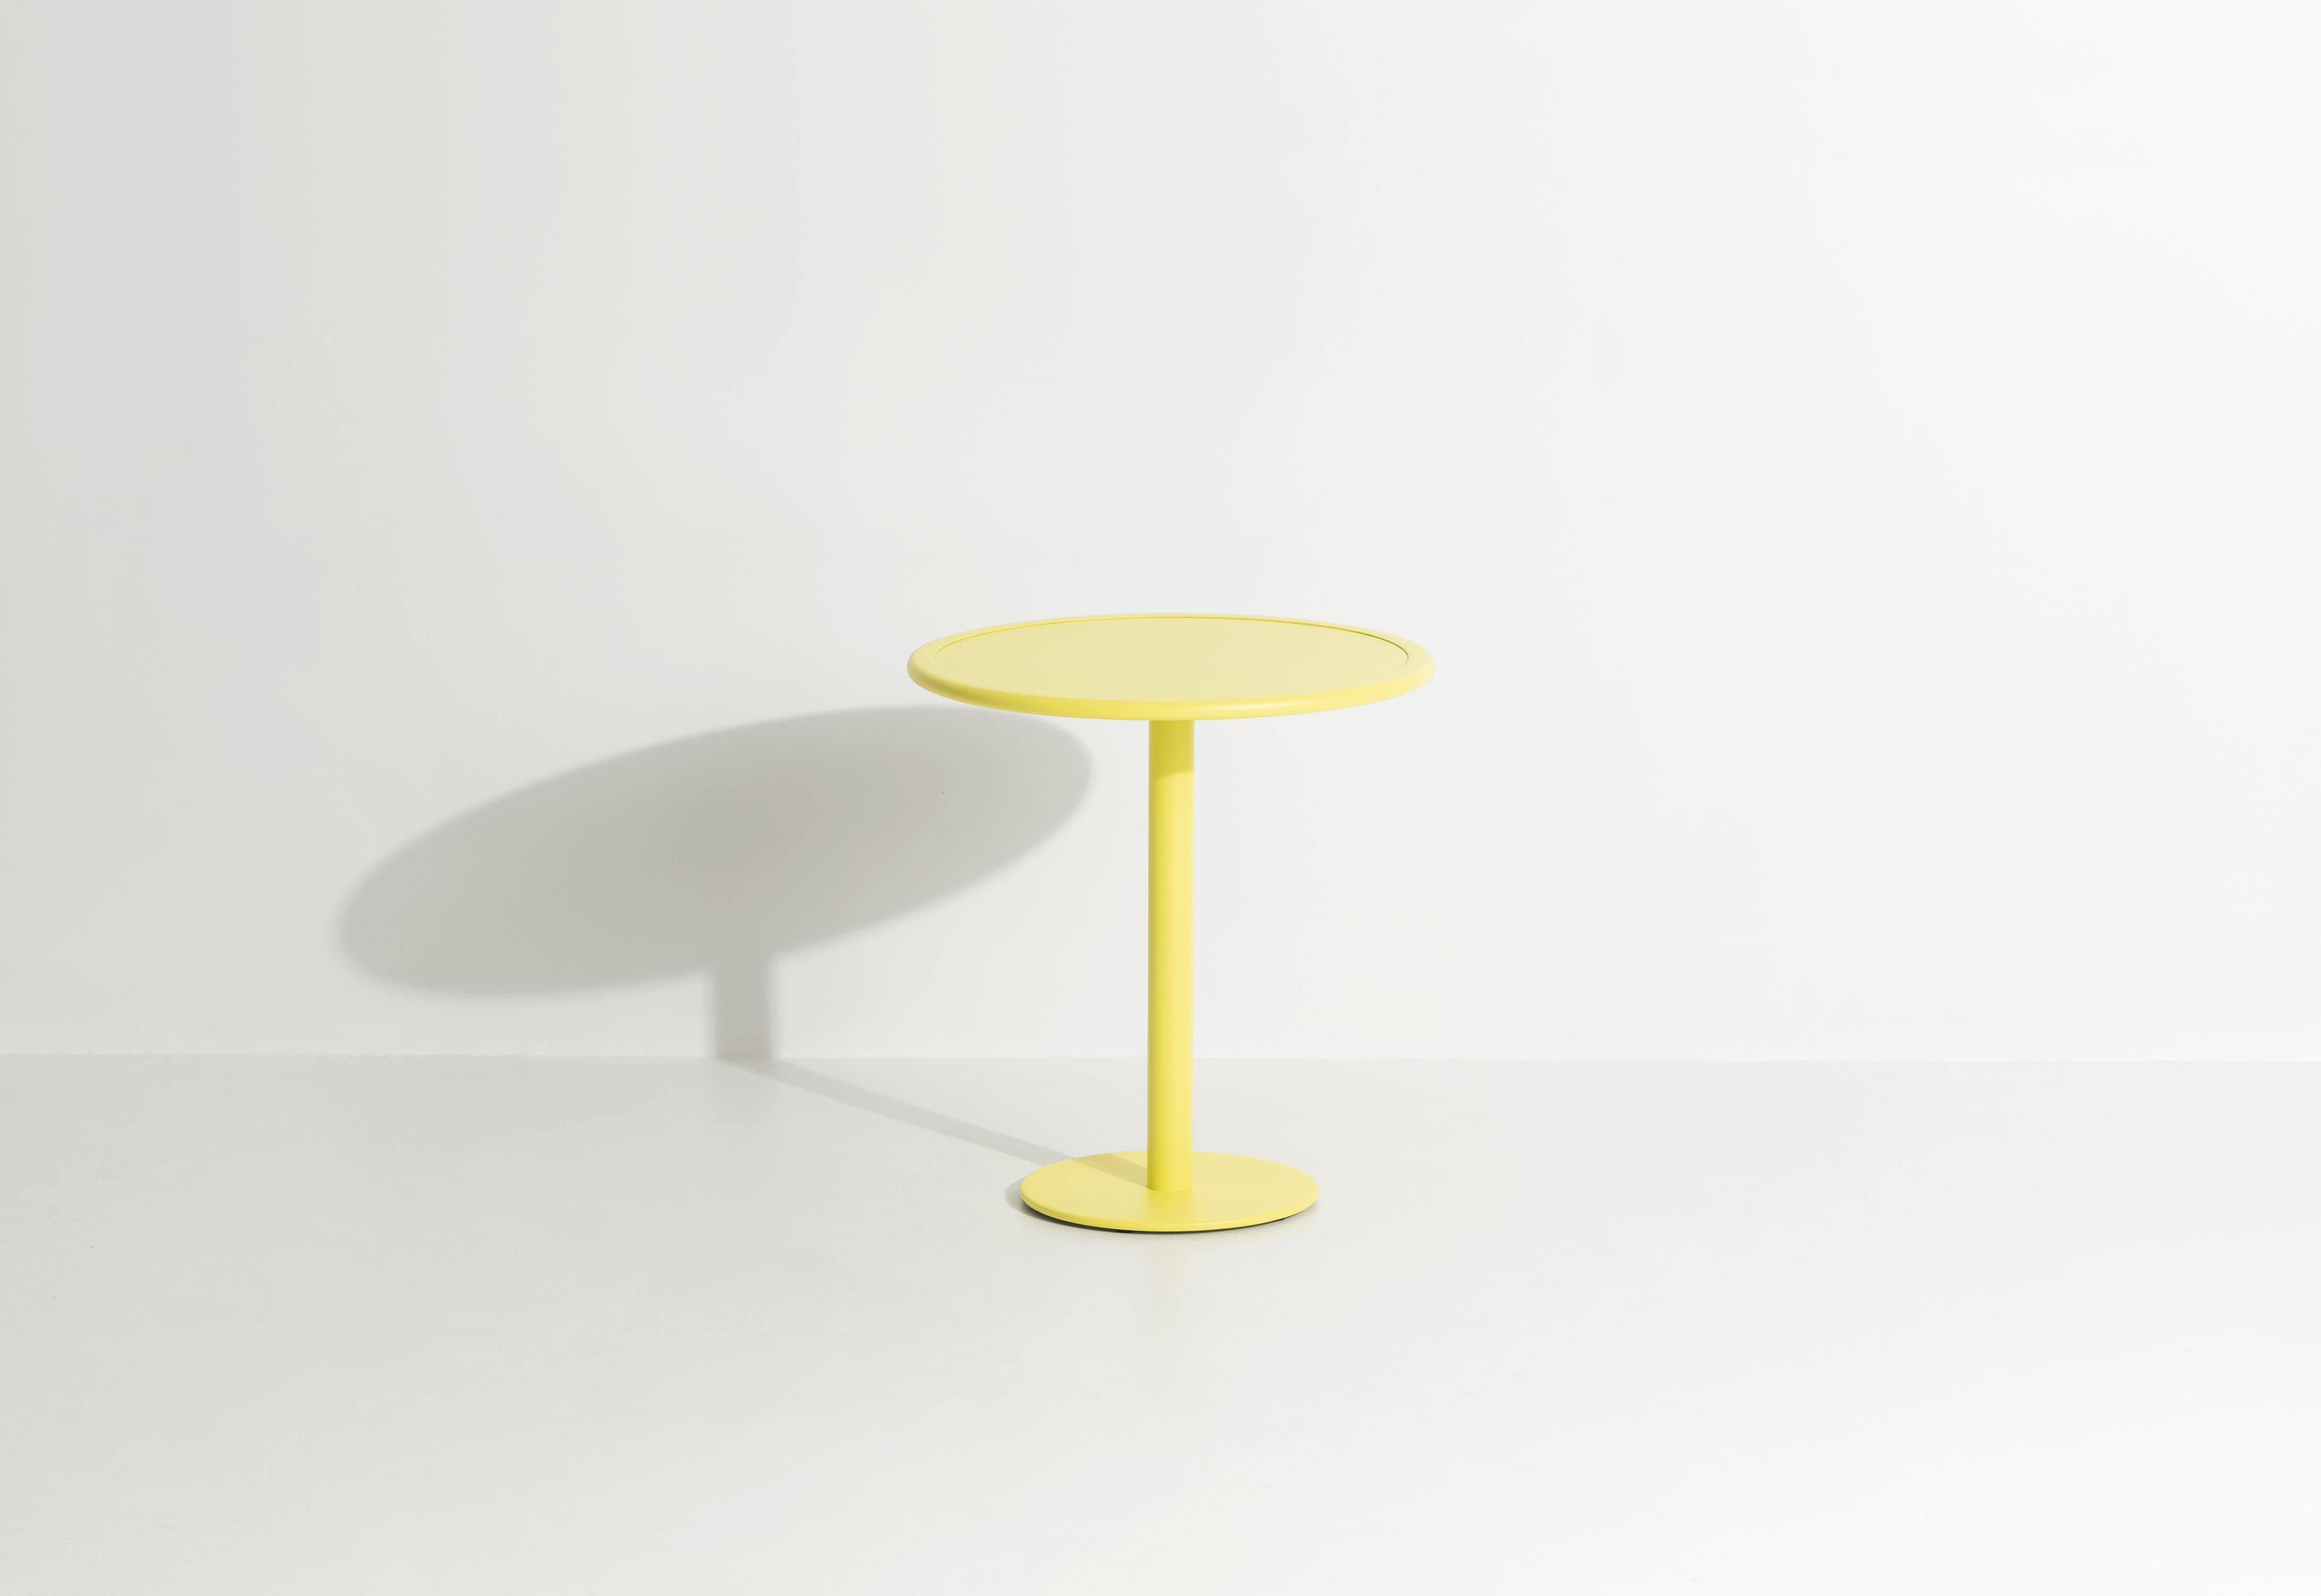 Petite Friture Week-End Bistro Round Dining Table in Yellow Aluminium by Studio BrichetZiegler, 2017

The week-end collection is a full range of outdoor furniture, in aluminium grained epoxy paint, matt finish, that includes 18 functions and 8